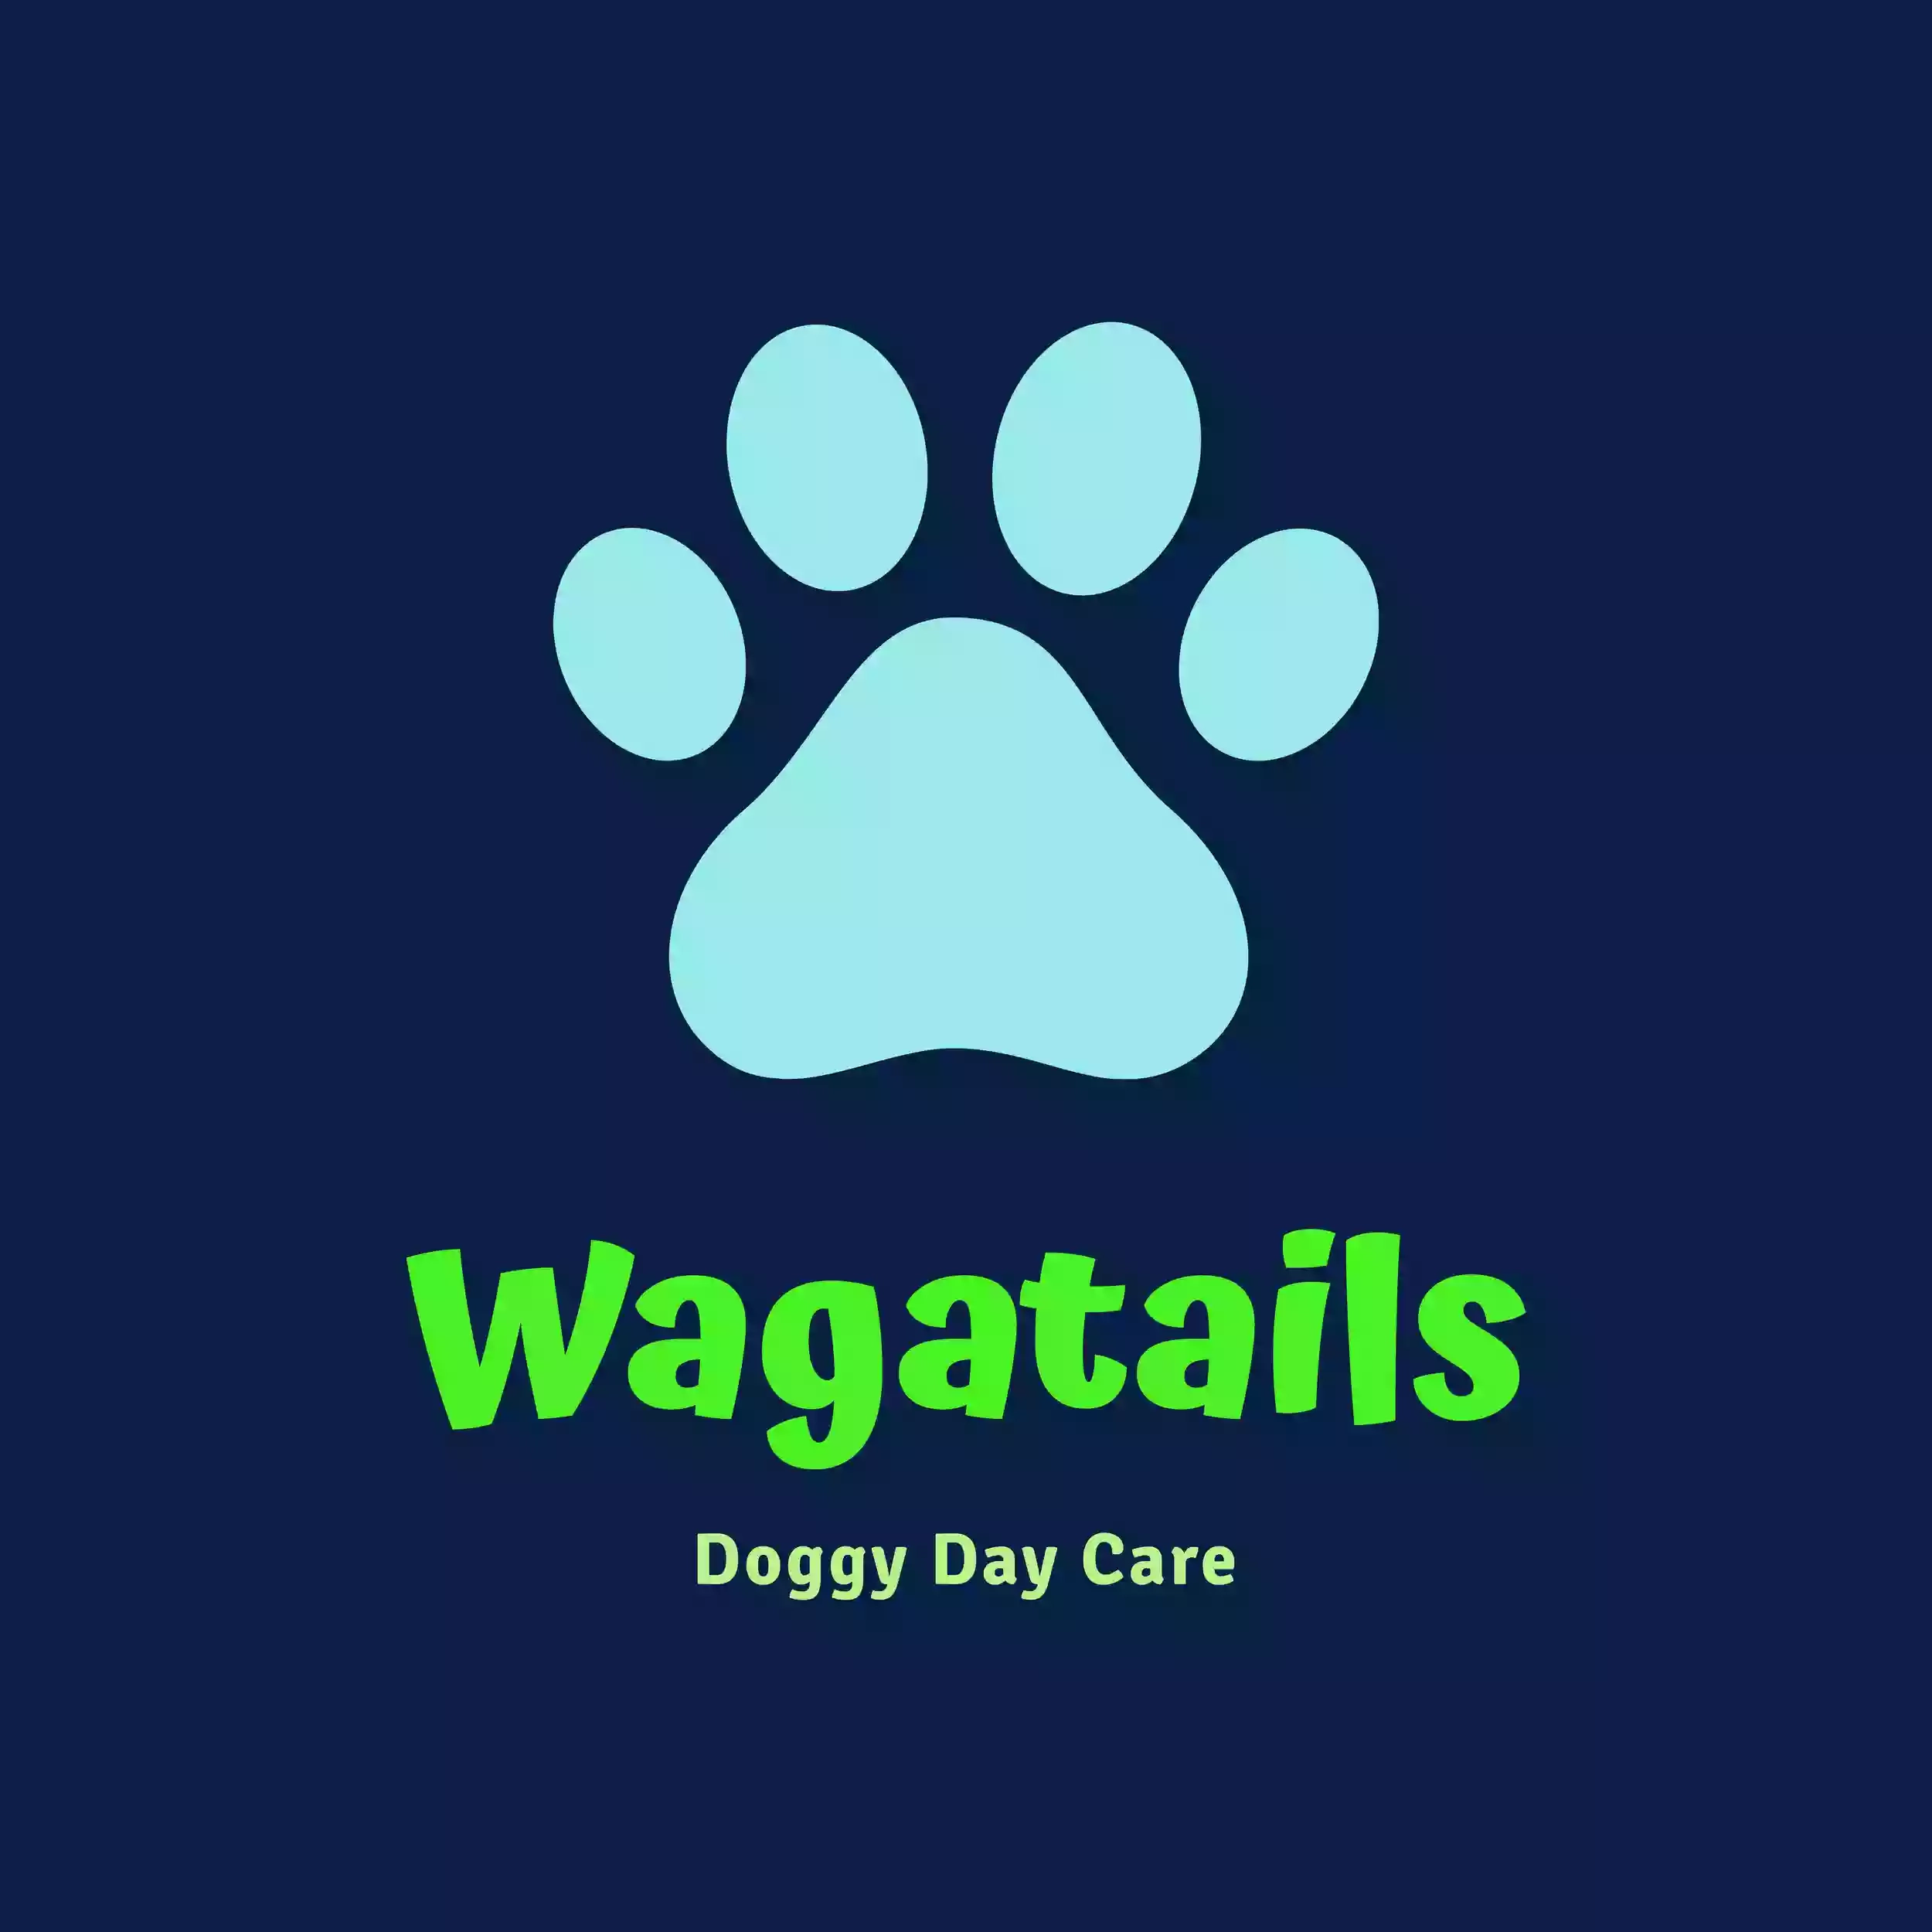 Wagatails Doggy Day Care